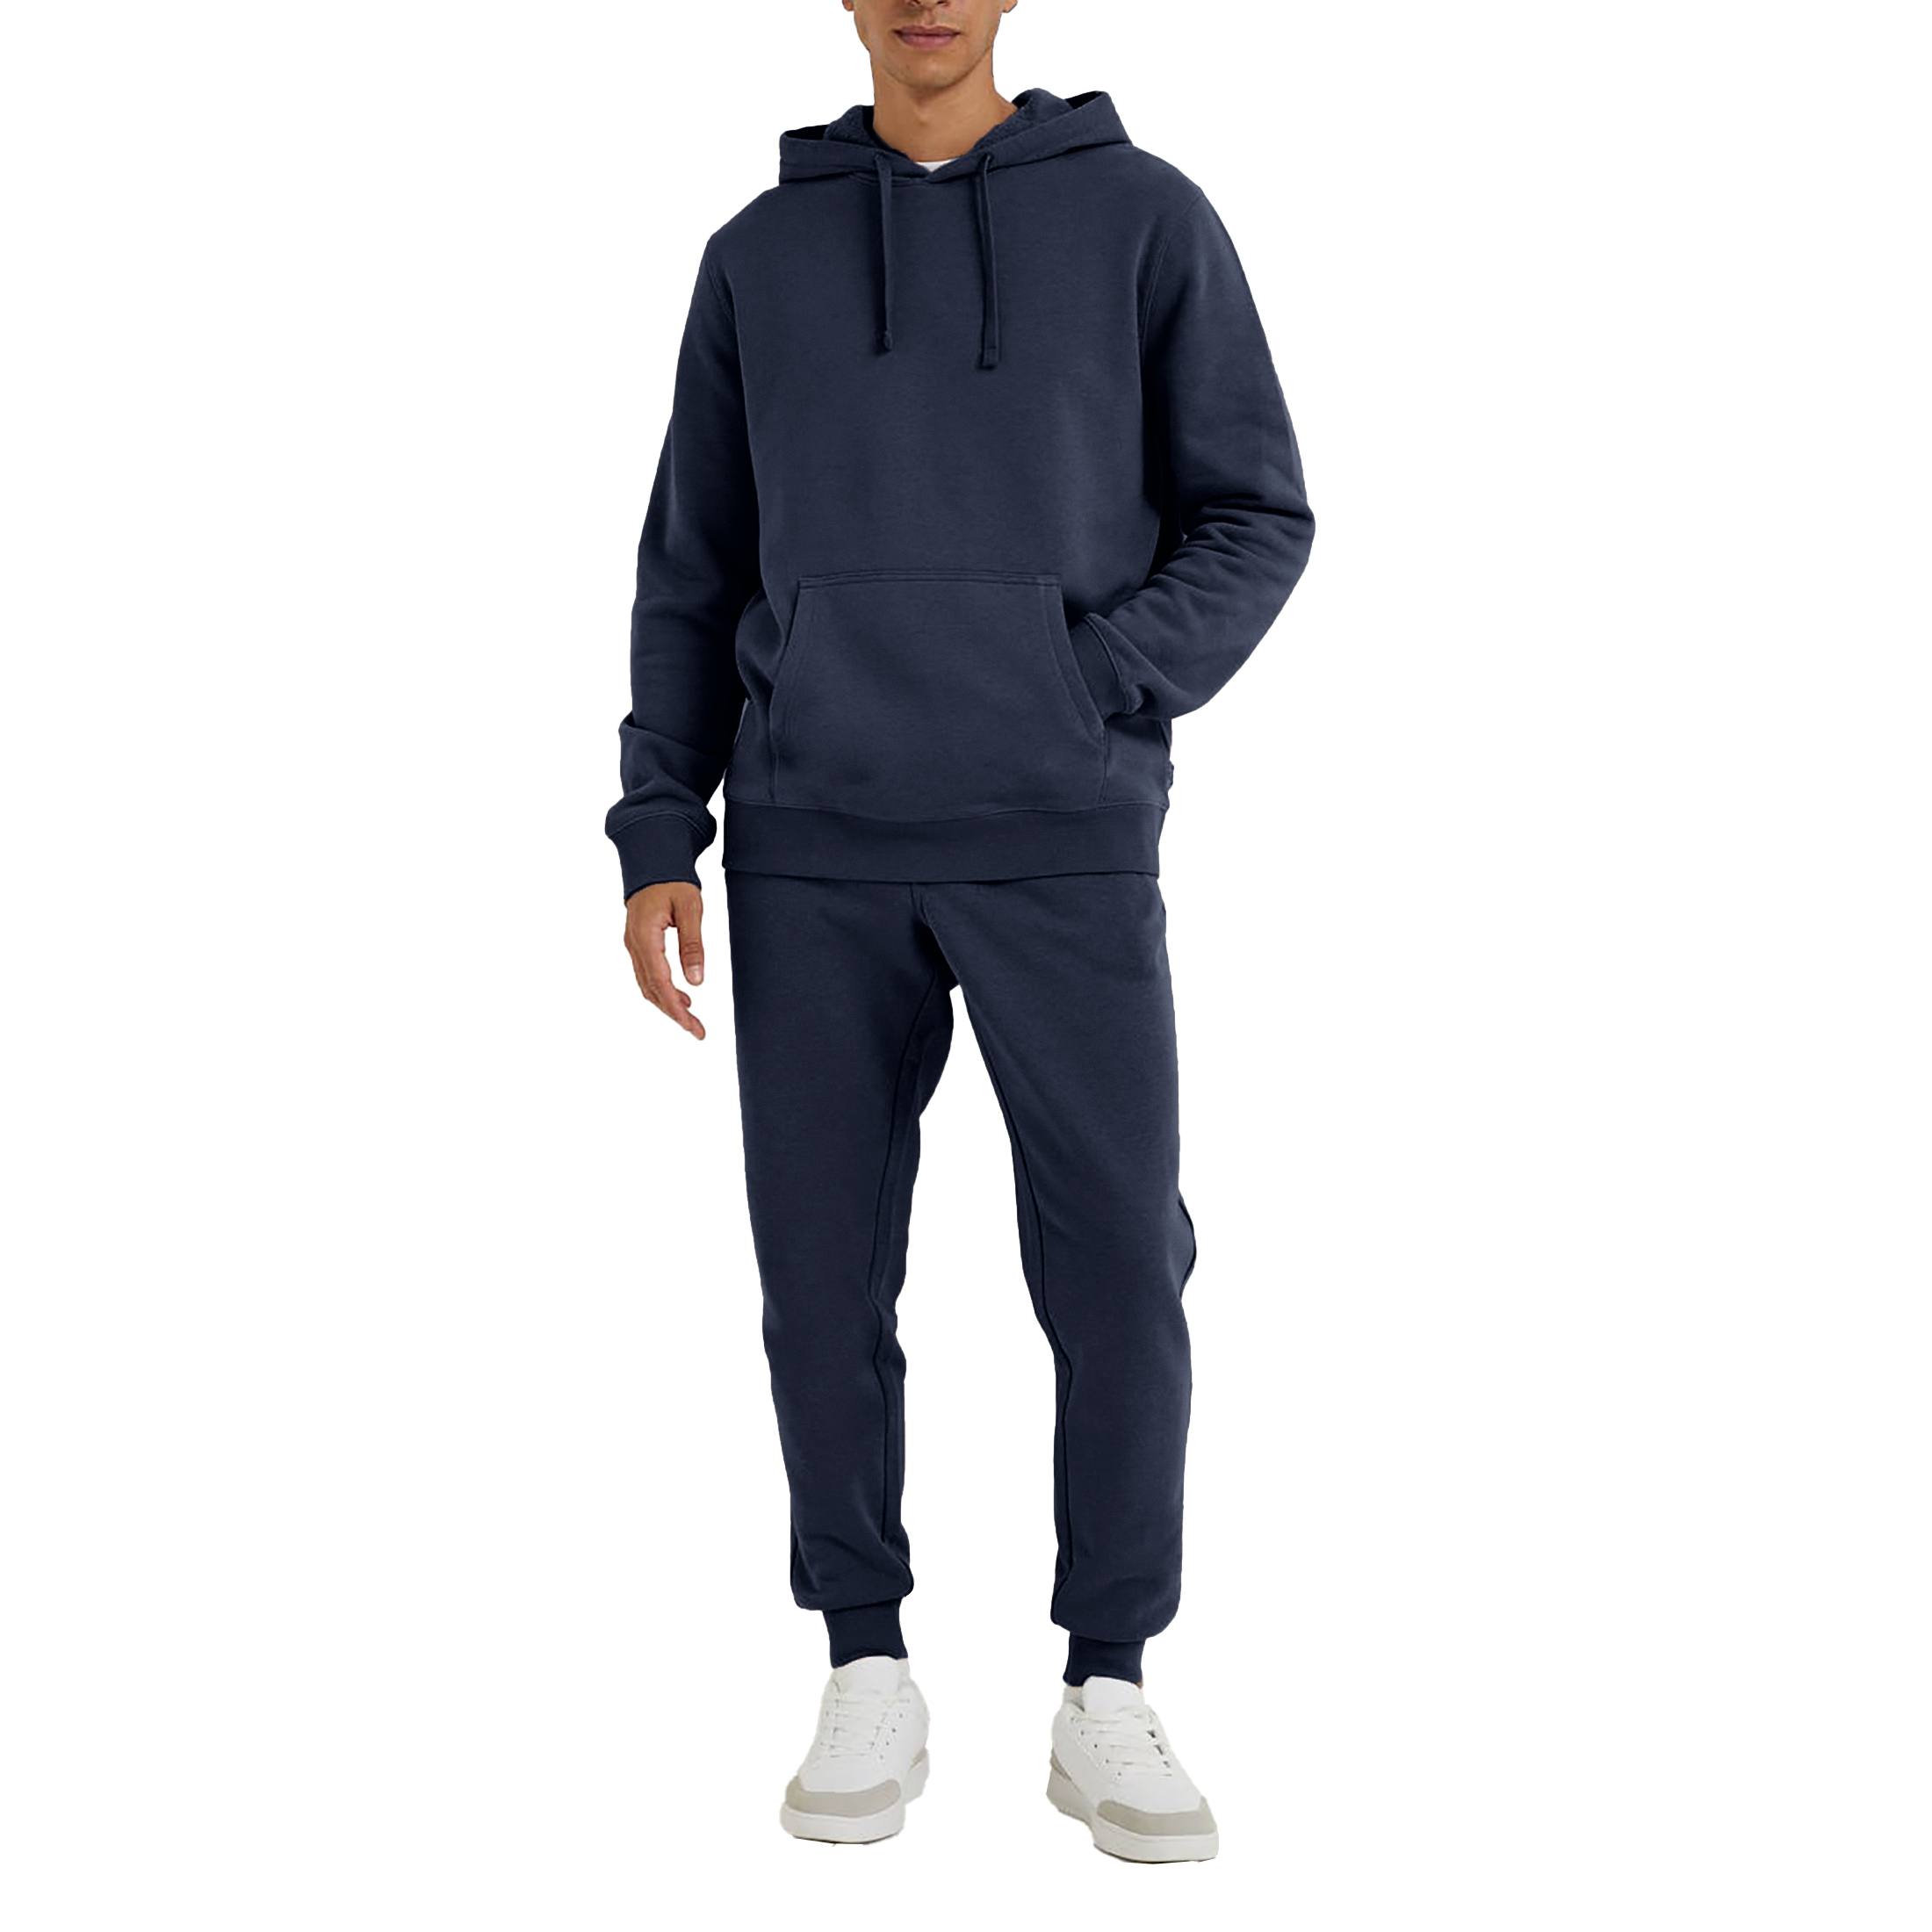 Men's Athletic Warm Jogging Pullover Active Tracksuit - Navy, 3X-Large